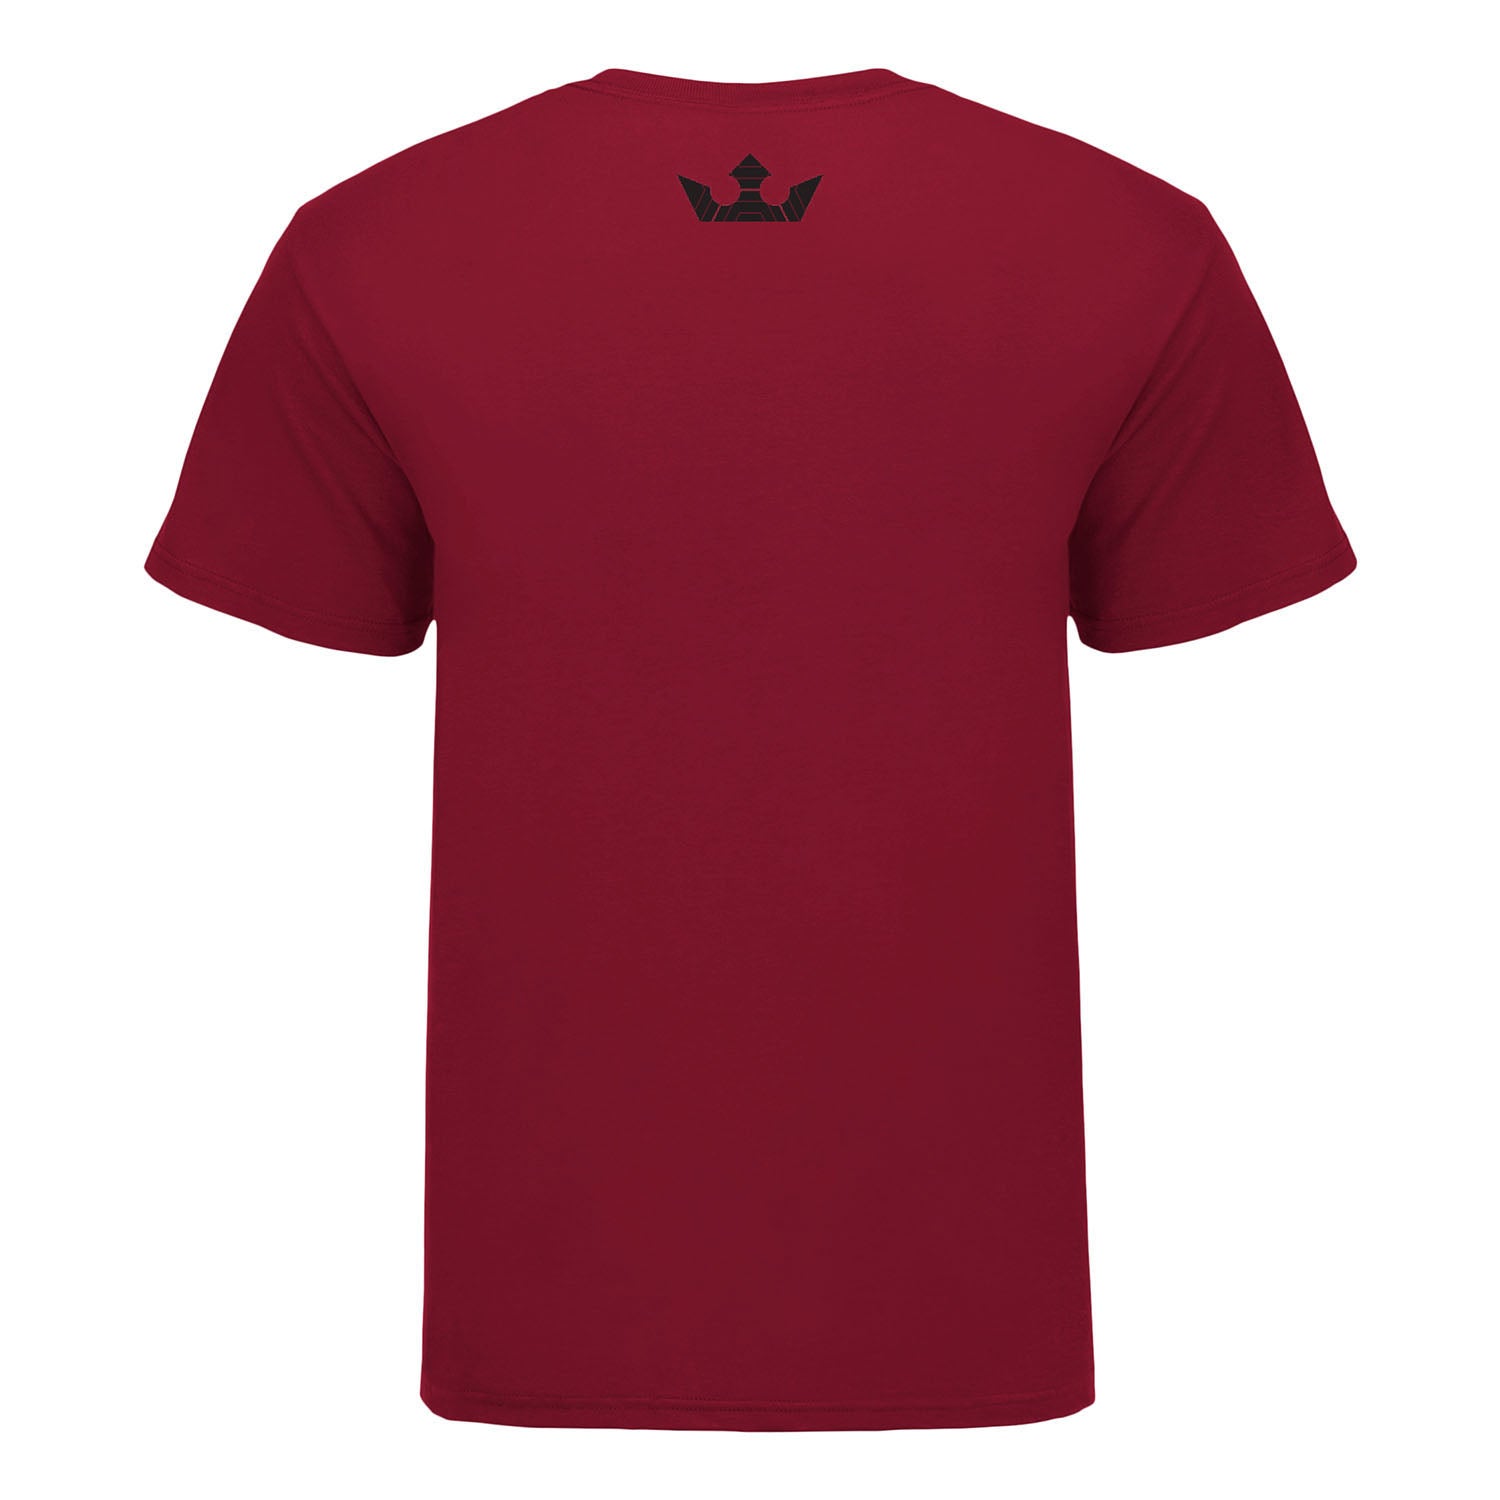 PFL Alternate Logo T-Shirt in Canvas Red - Front View